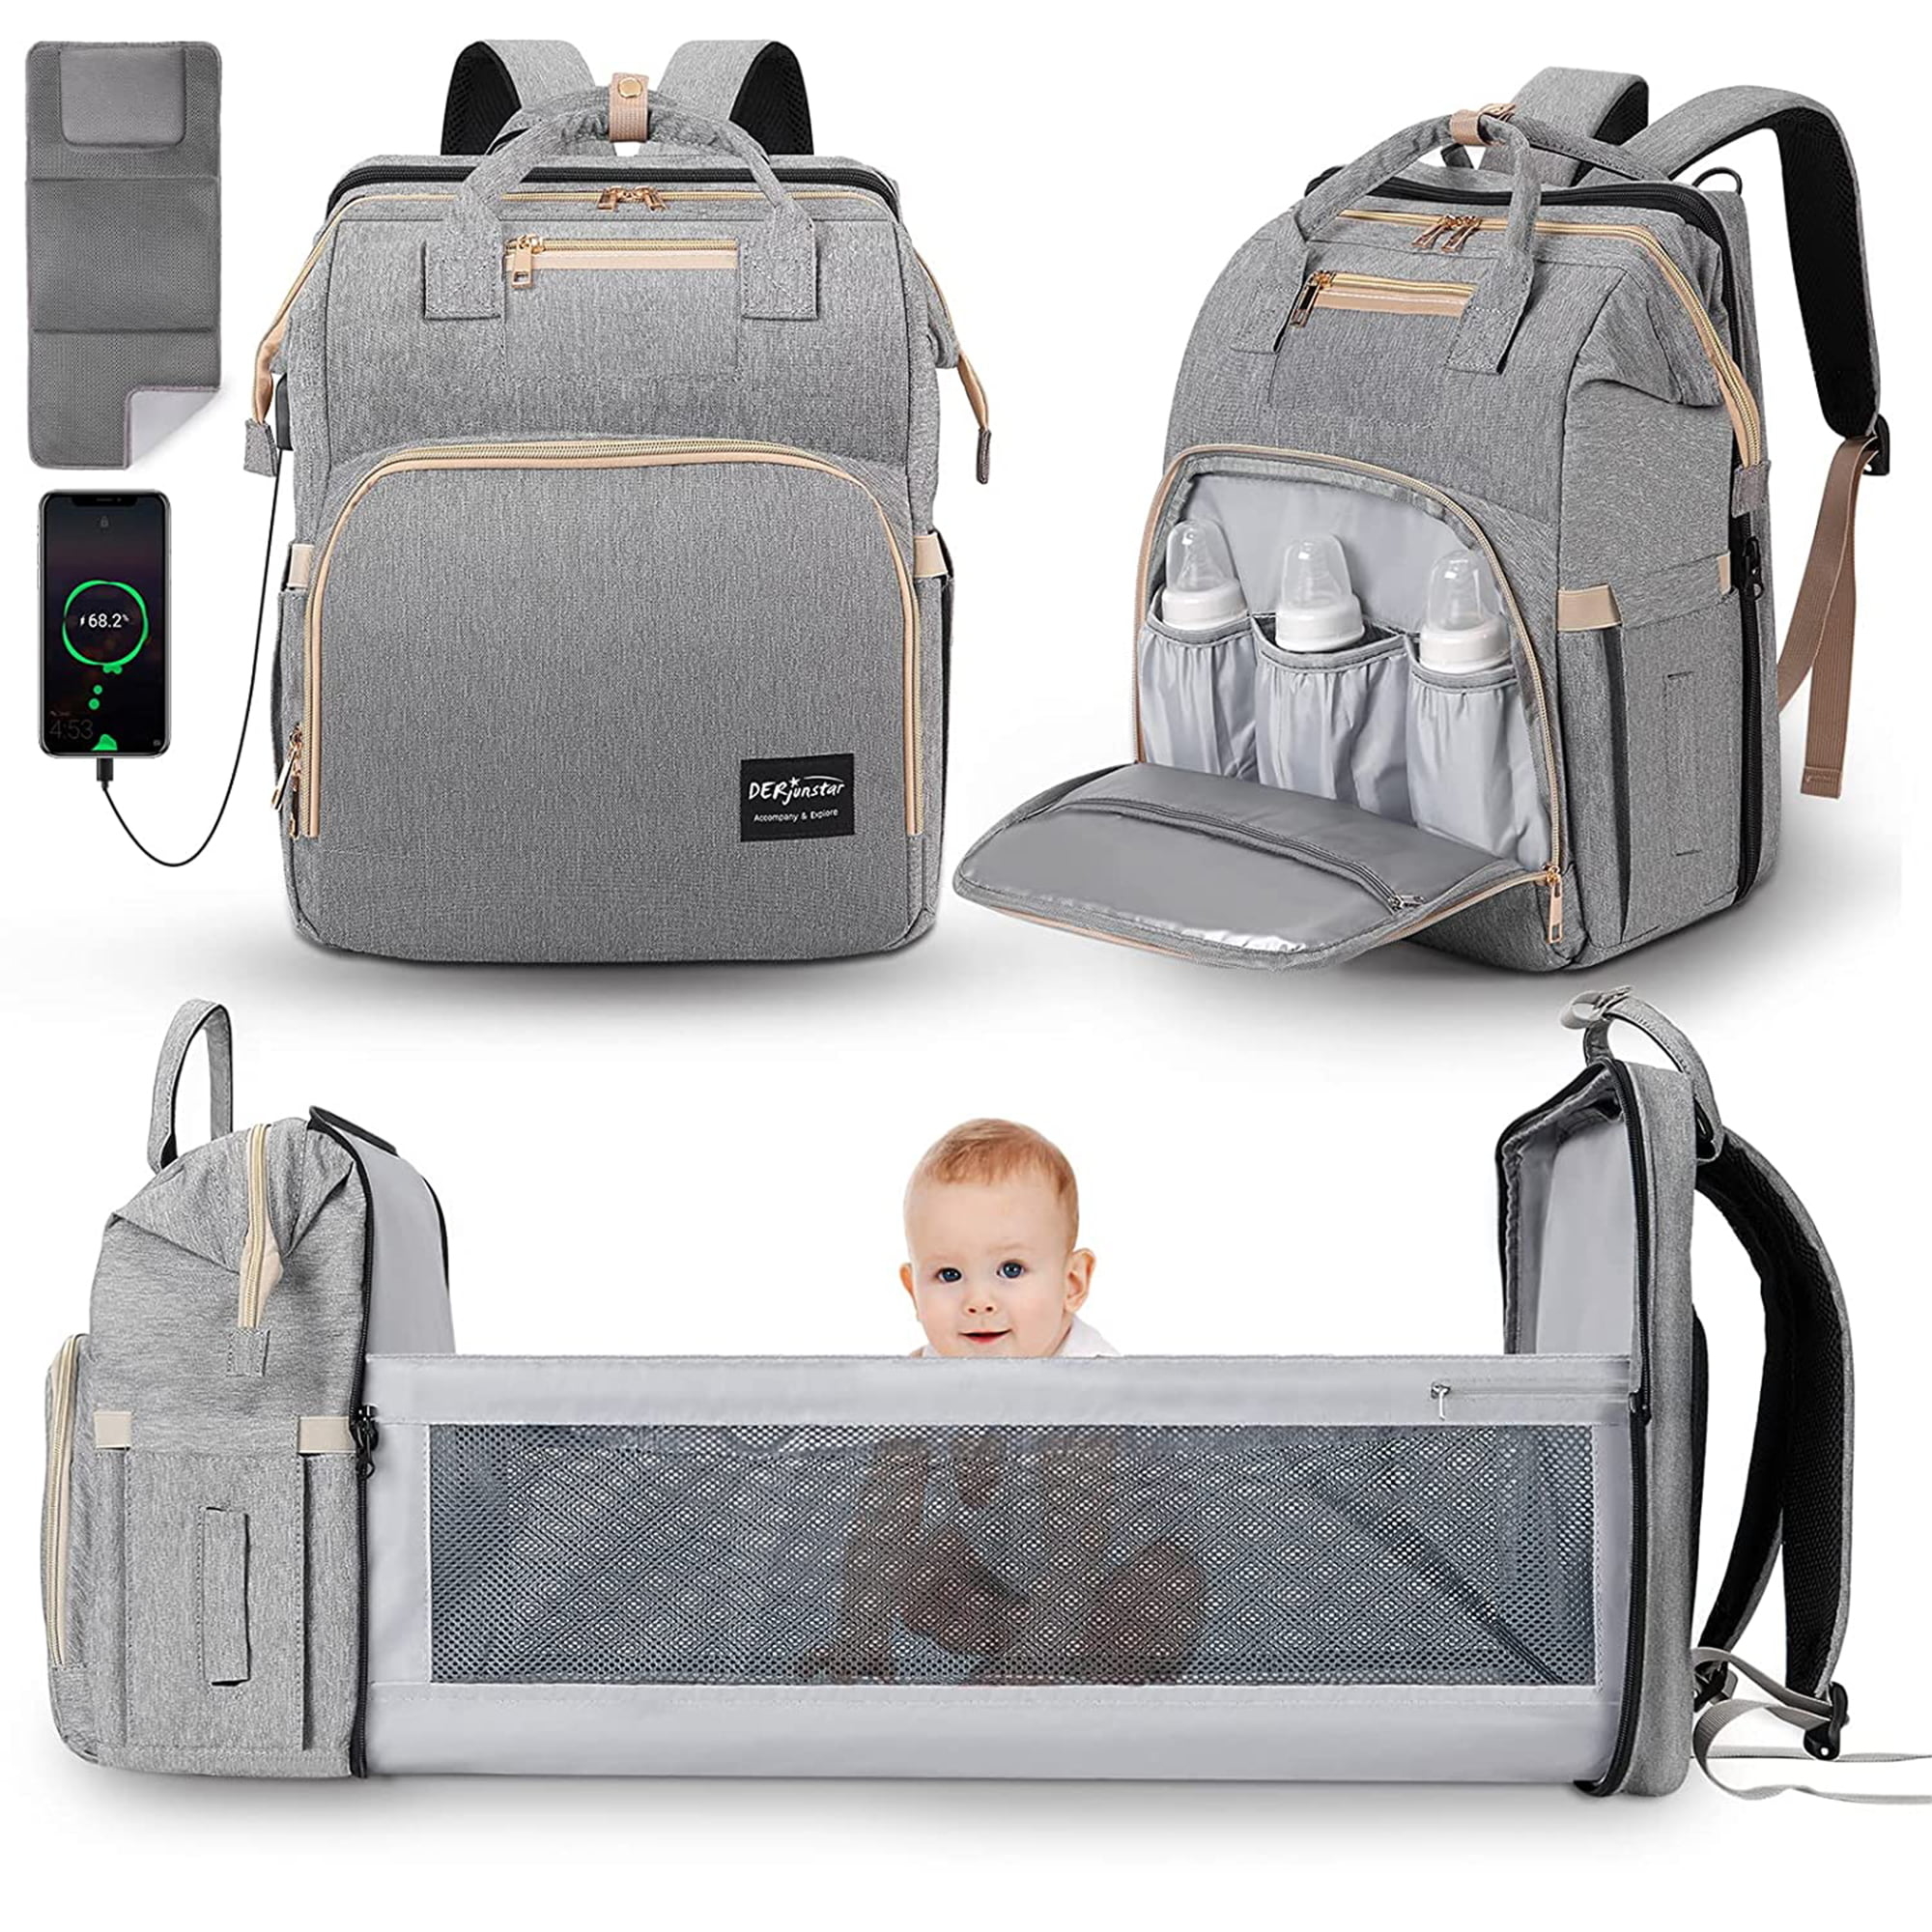 Multiple view of the same diaper bag to demonstrate features. It Charges your cell phone, has 3 bottle holders and an expandable diaper changing station.